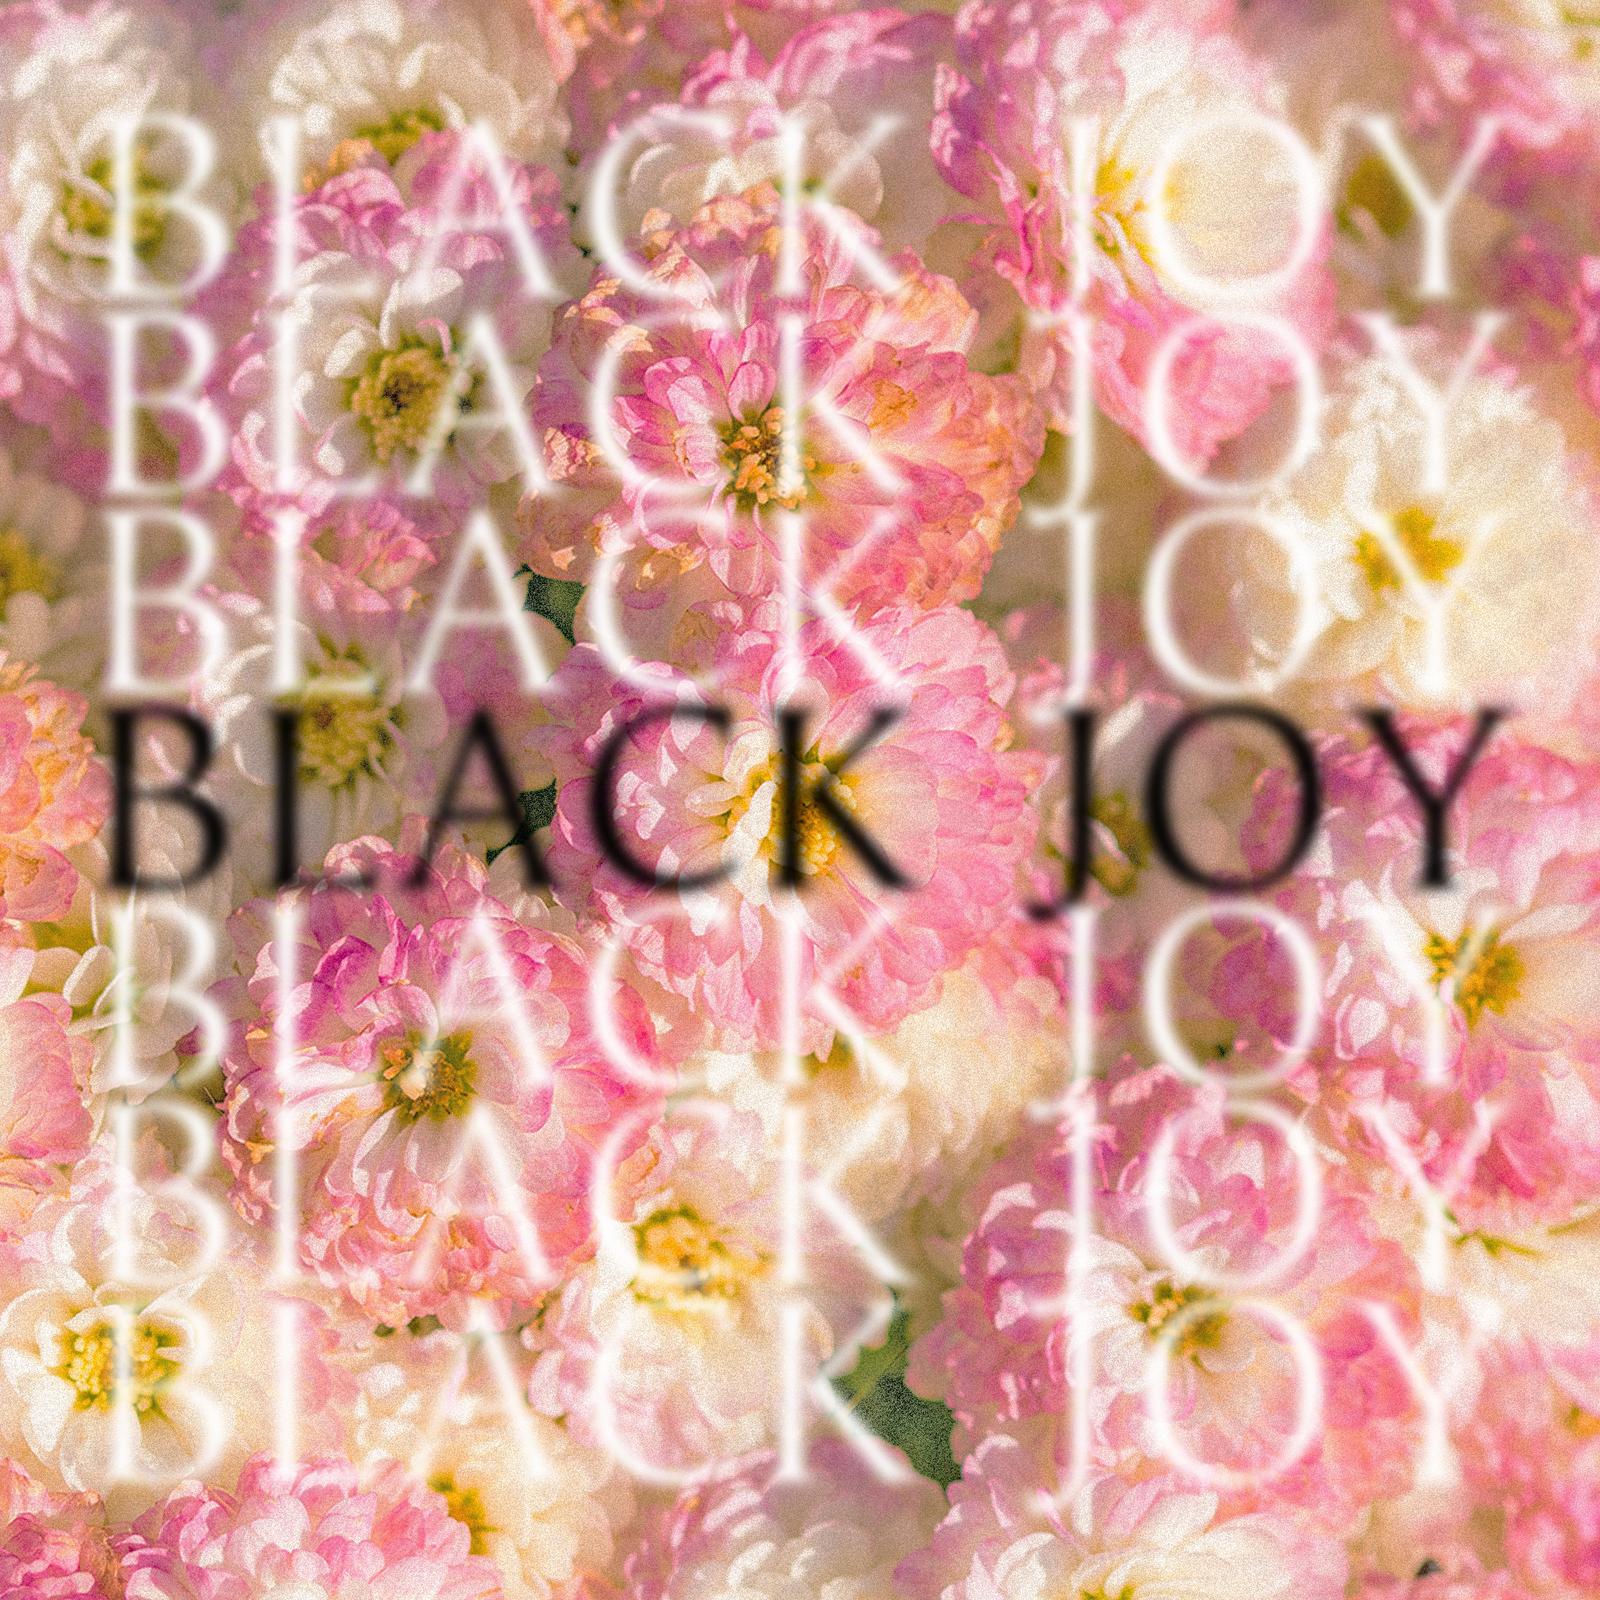 Pink flowers with repeating text reading BLACK JOY overlayed